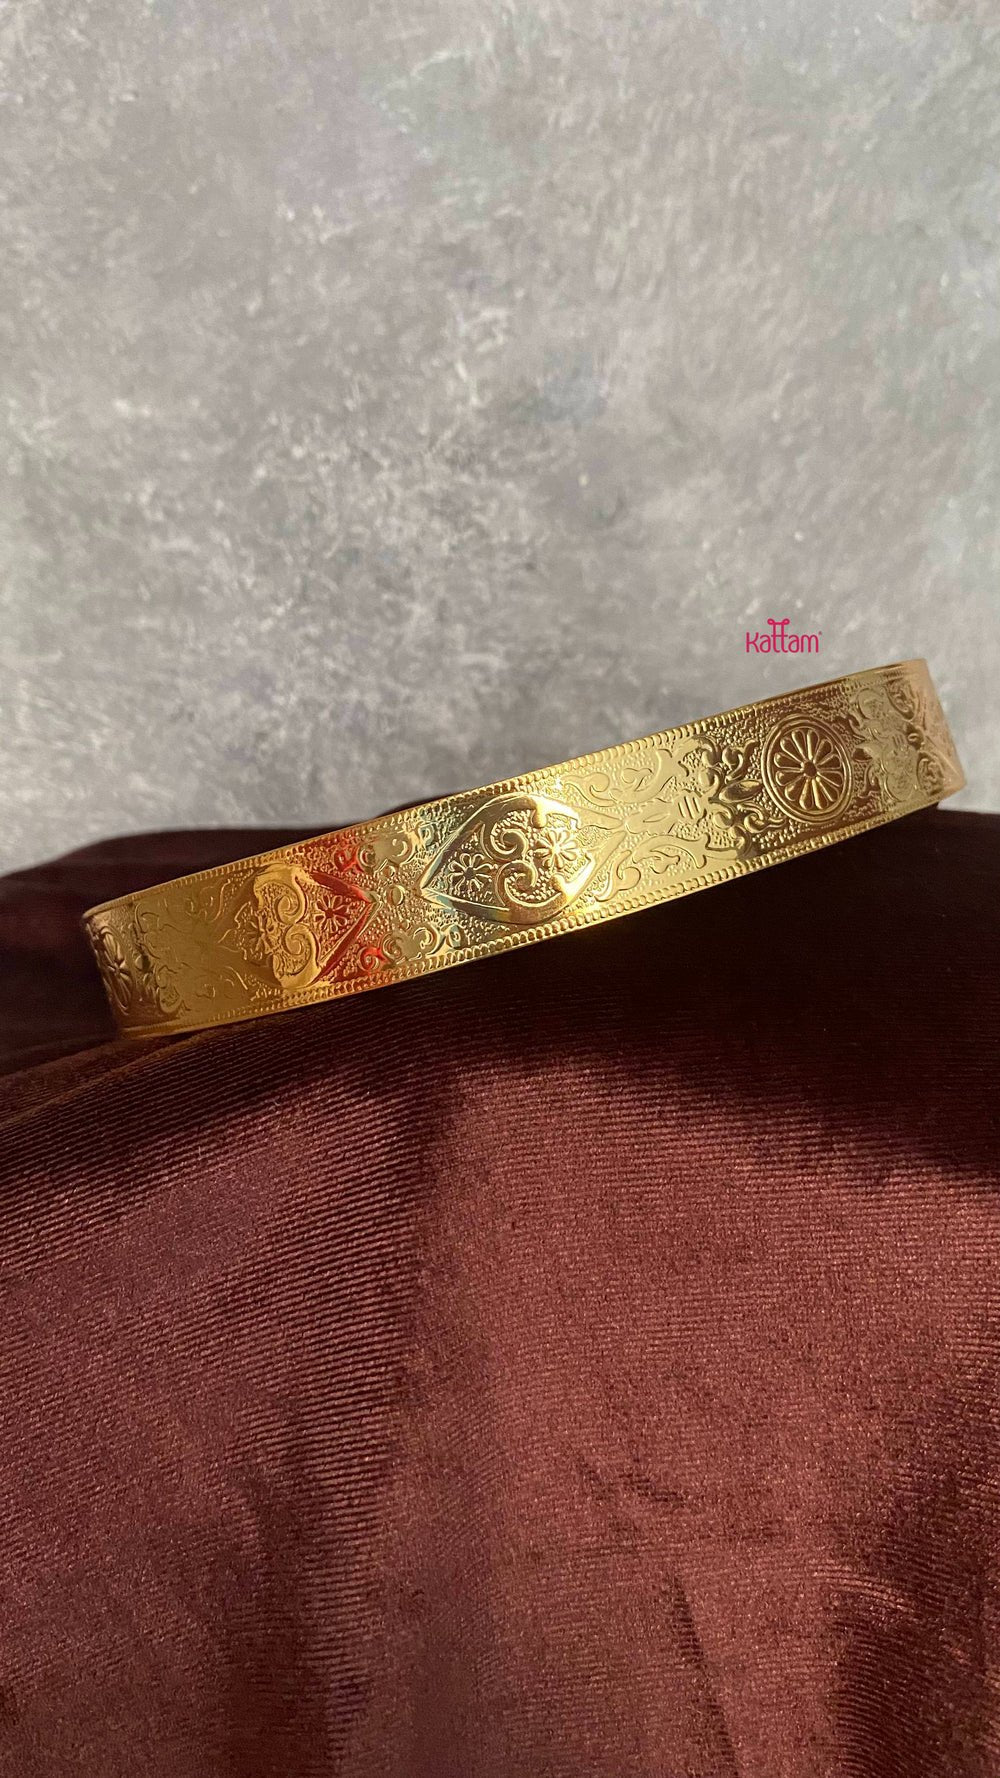 Engraved Jali Belt ( Baby & Adult Size Available ) - HB020